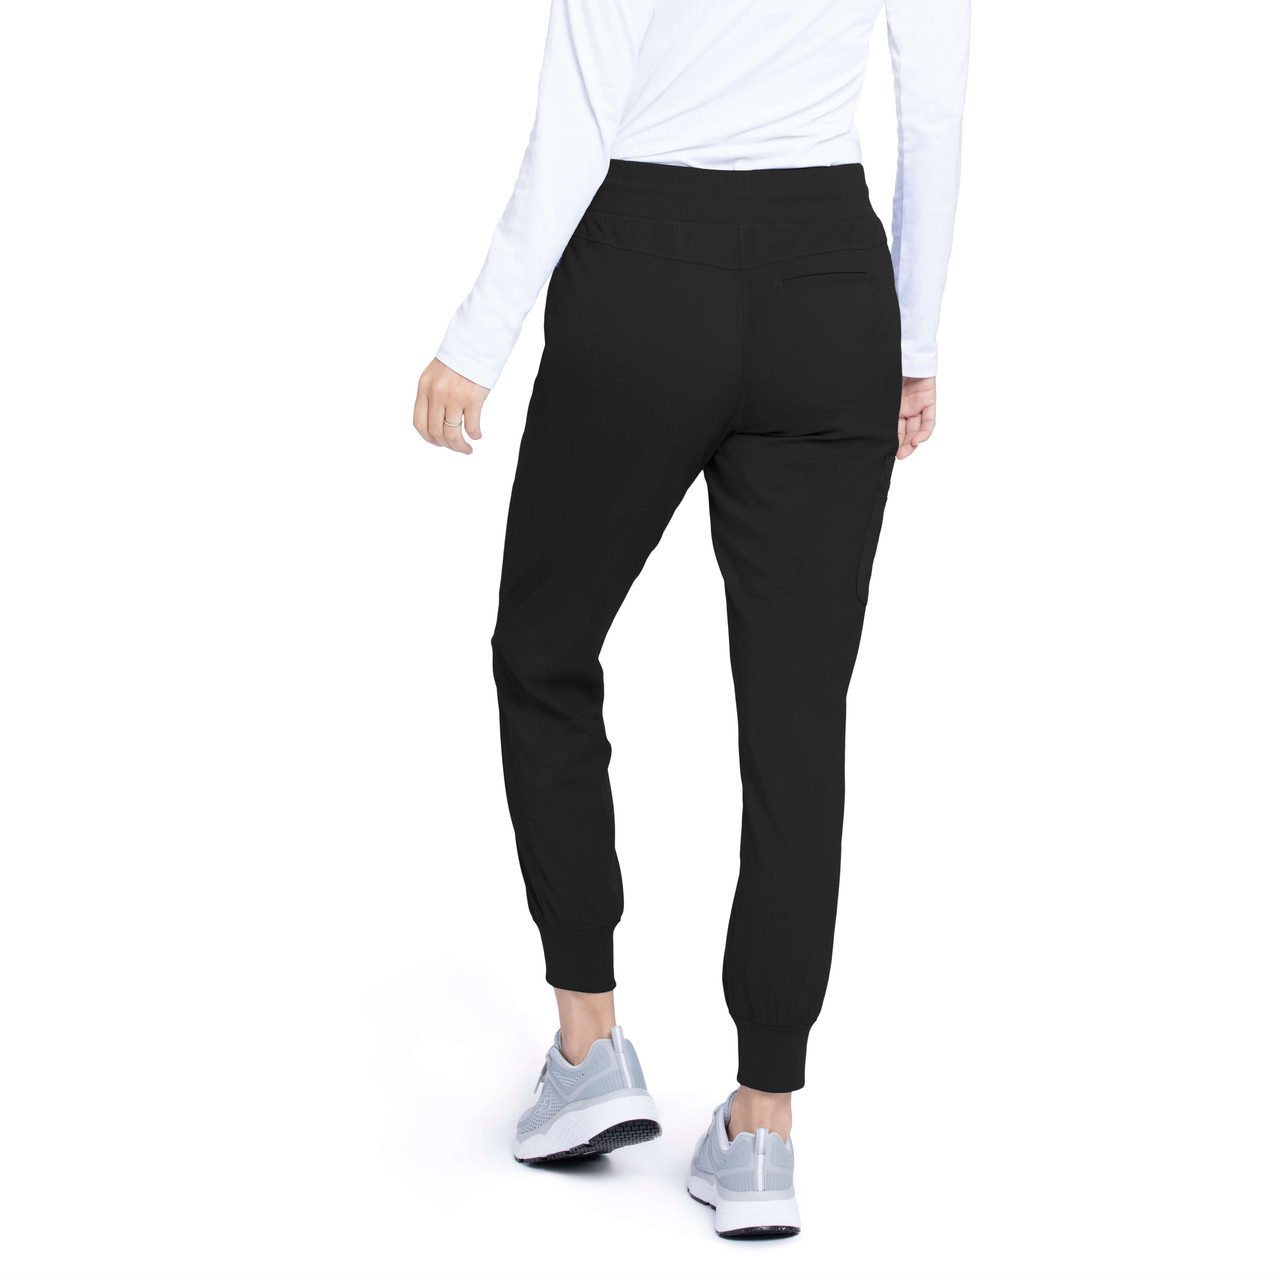 https://cdn11.bigcommerce.com/s-ufd27ryzwl/images/stencil/1280x1280/products/1755/4755/Greys_Anatomy_Spandex_Stretch_Jogger_Pant_GRSP537_Black_Back_View__28681.1663014463.jpg?c=1